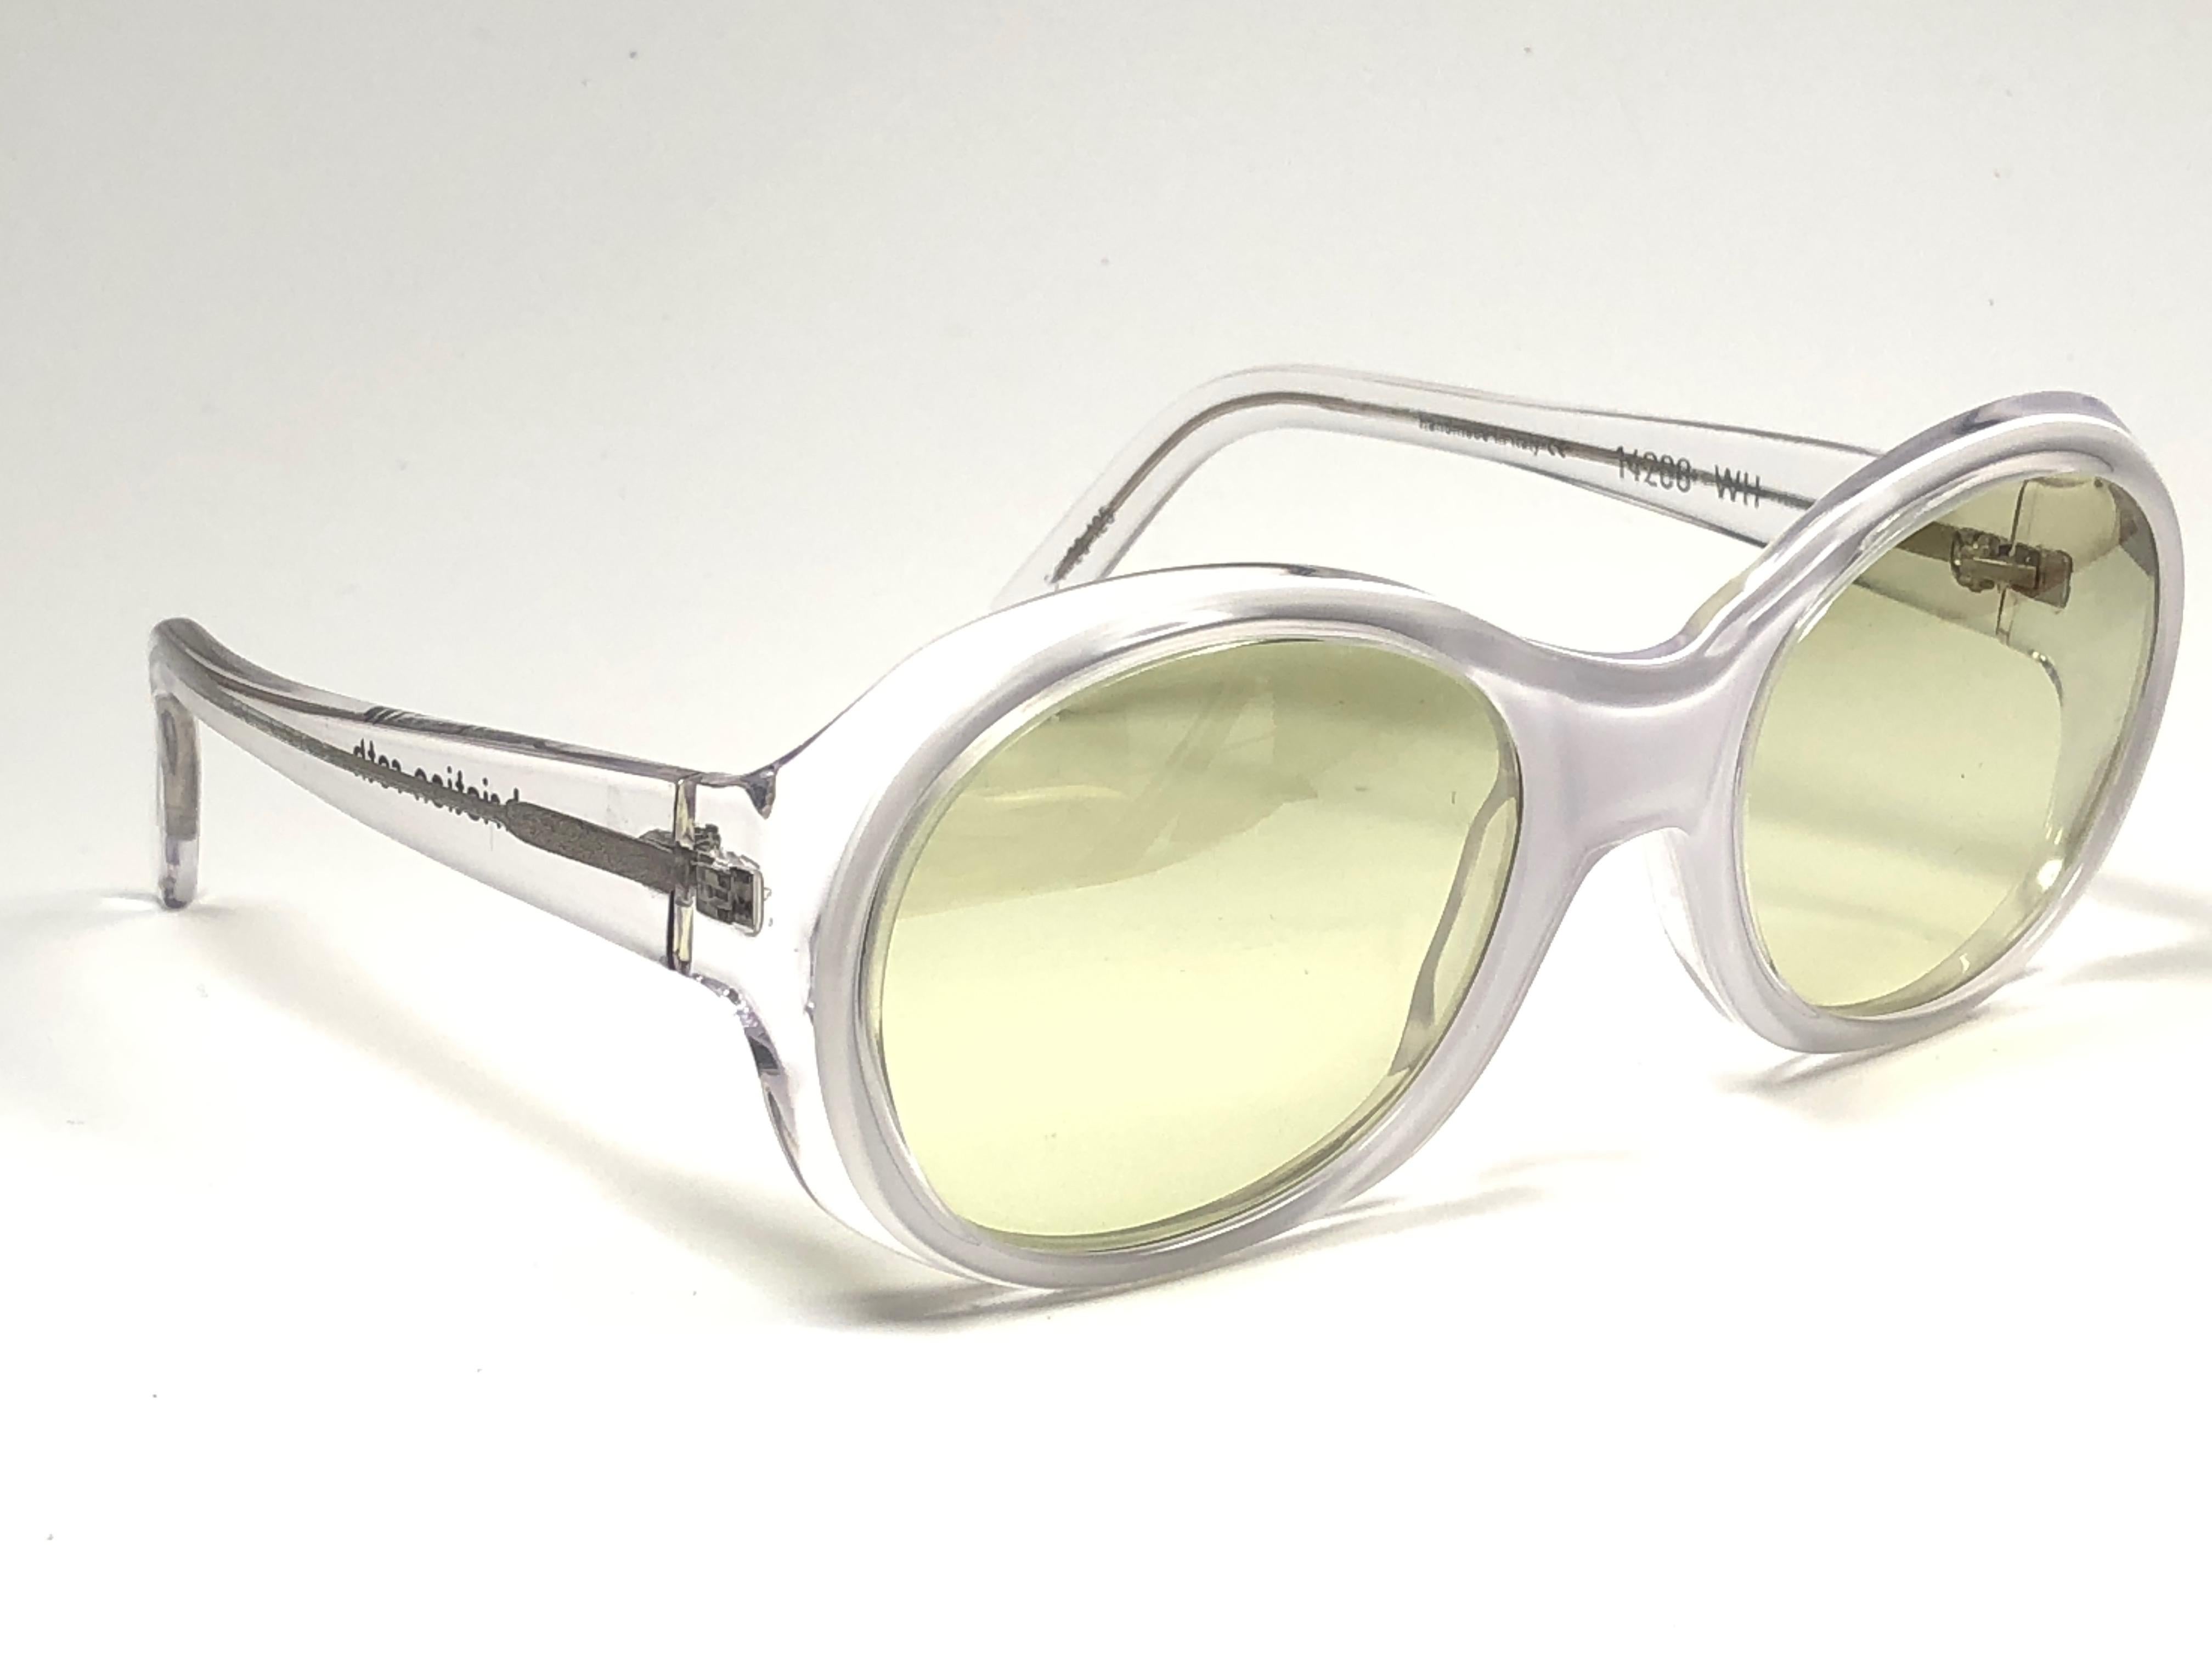 New Vintage Christian Roth translucent and white medium size frame y light, slight mirrored lenses.

New, never worn or displayed this pair may show minor sign of wear due to storage.

Handmade in Italy.